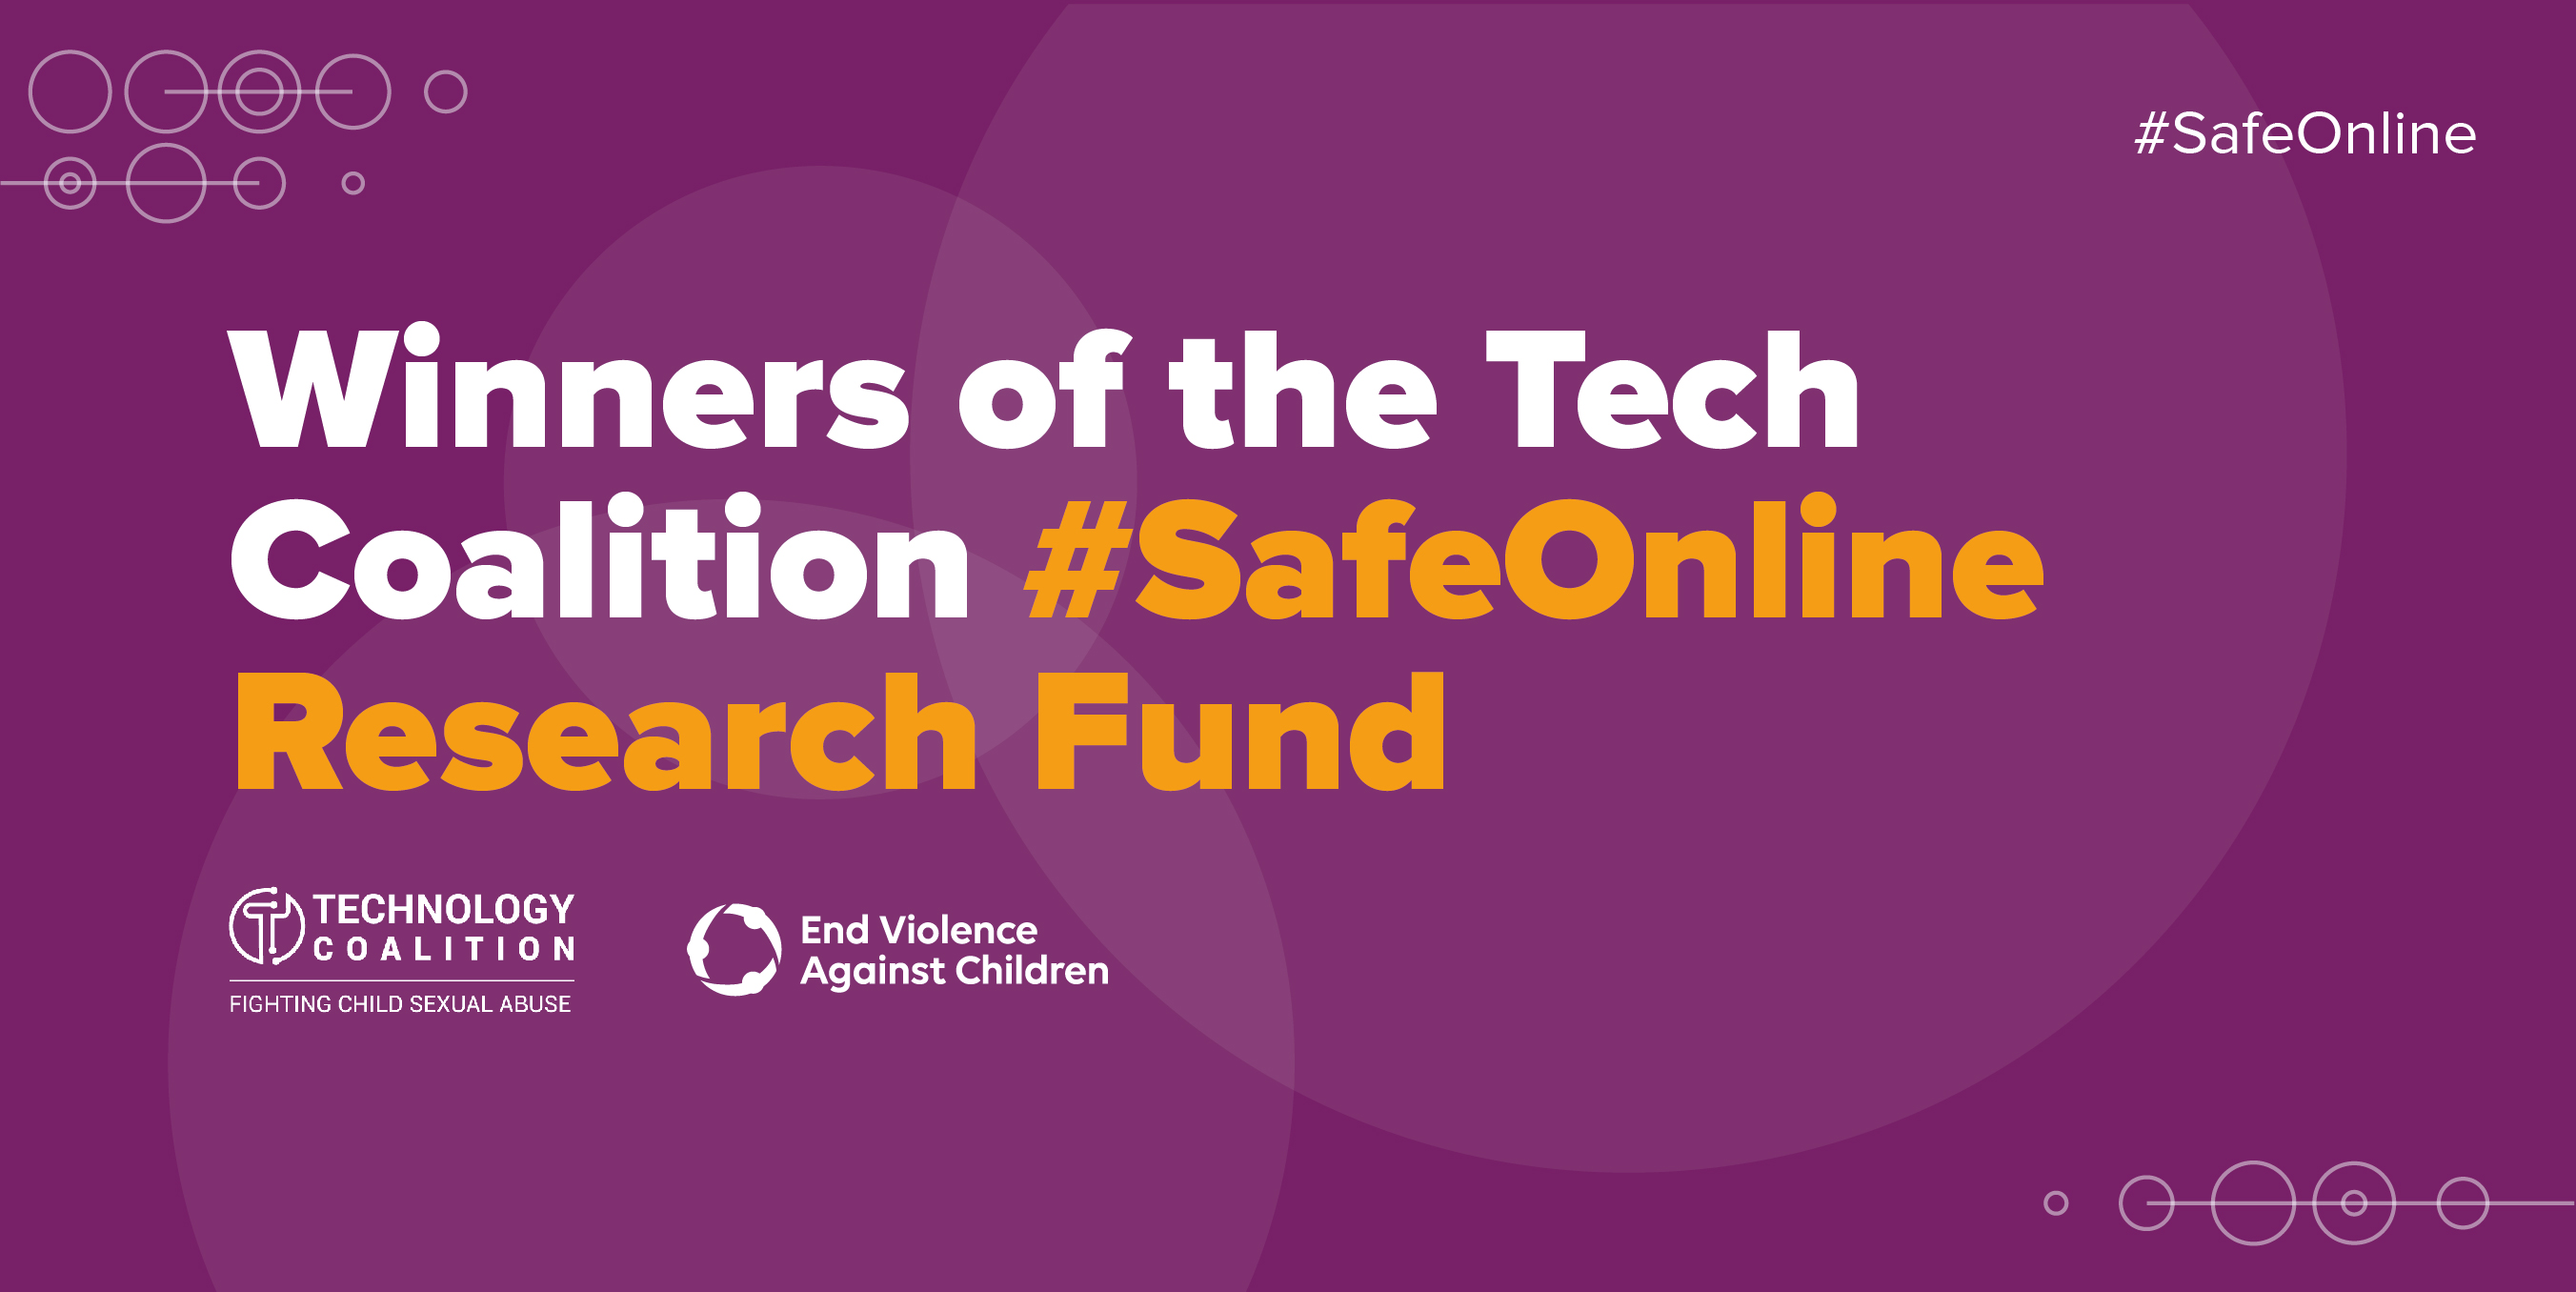 Winners of the tech coalition #SafeOnline Research fund